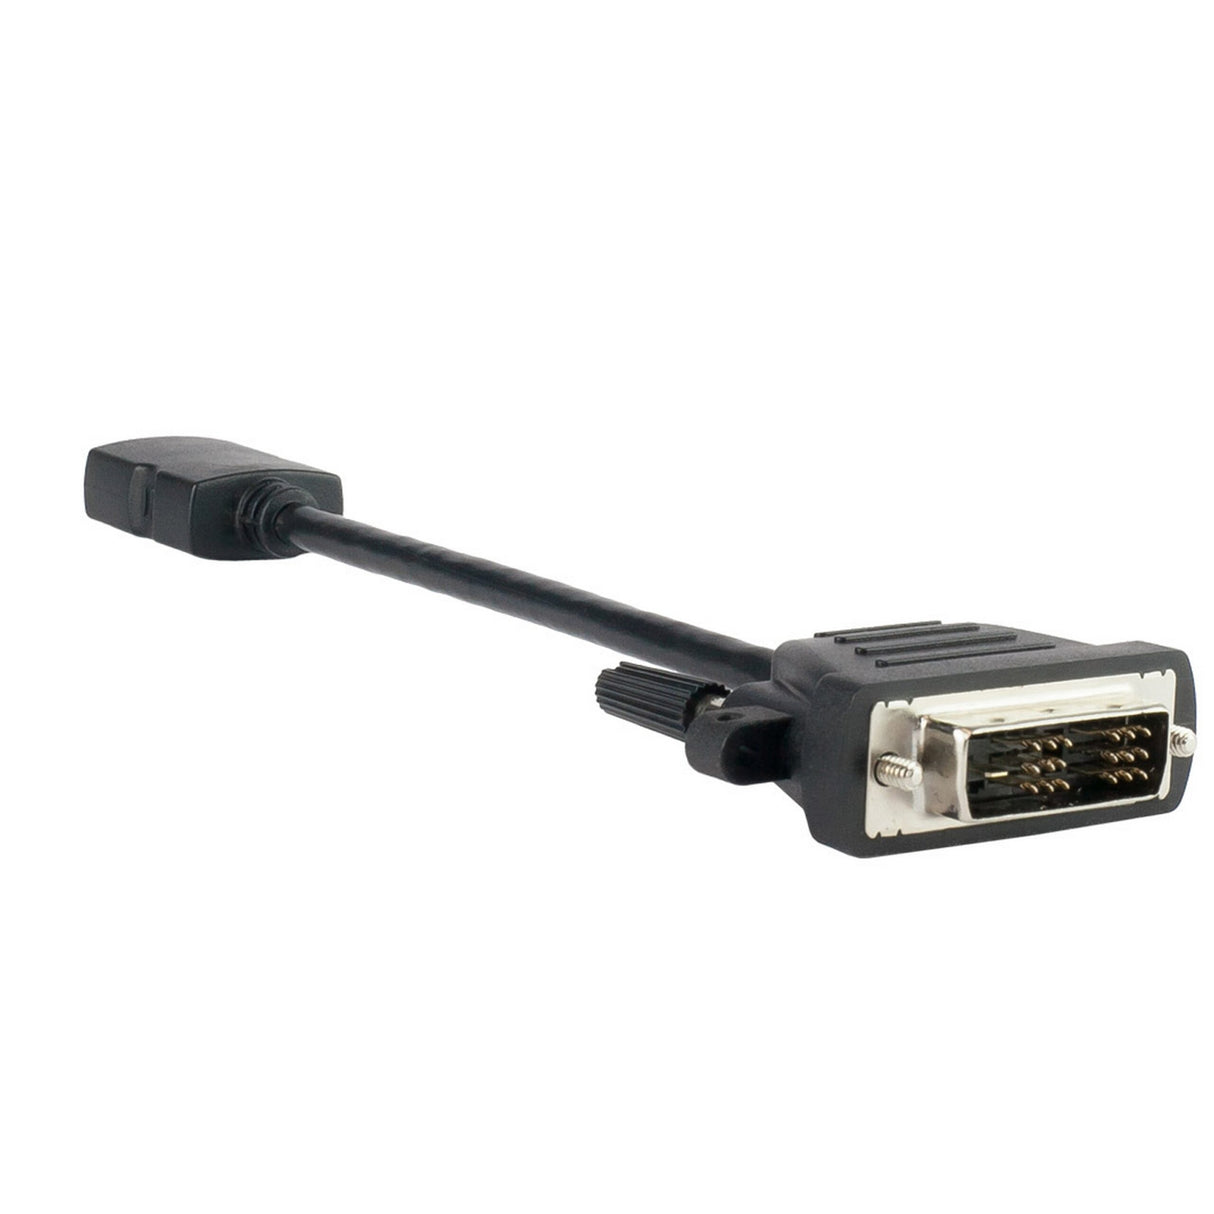 DigitaLinx AR-DVM-HDF DVI Male to HDMI Female Adapter Cable, 5 Inches